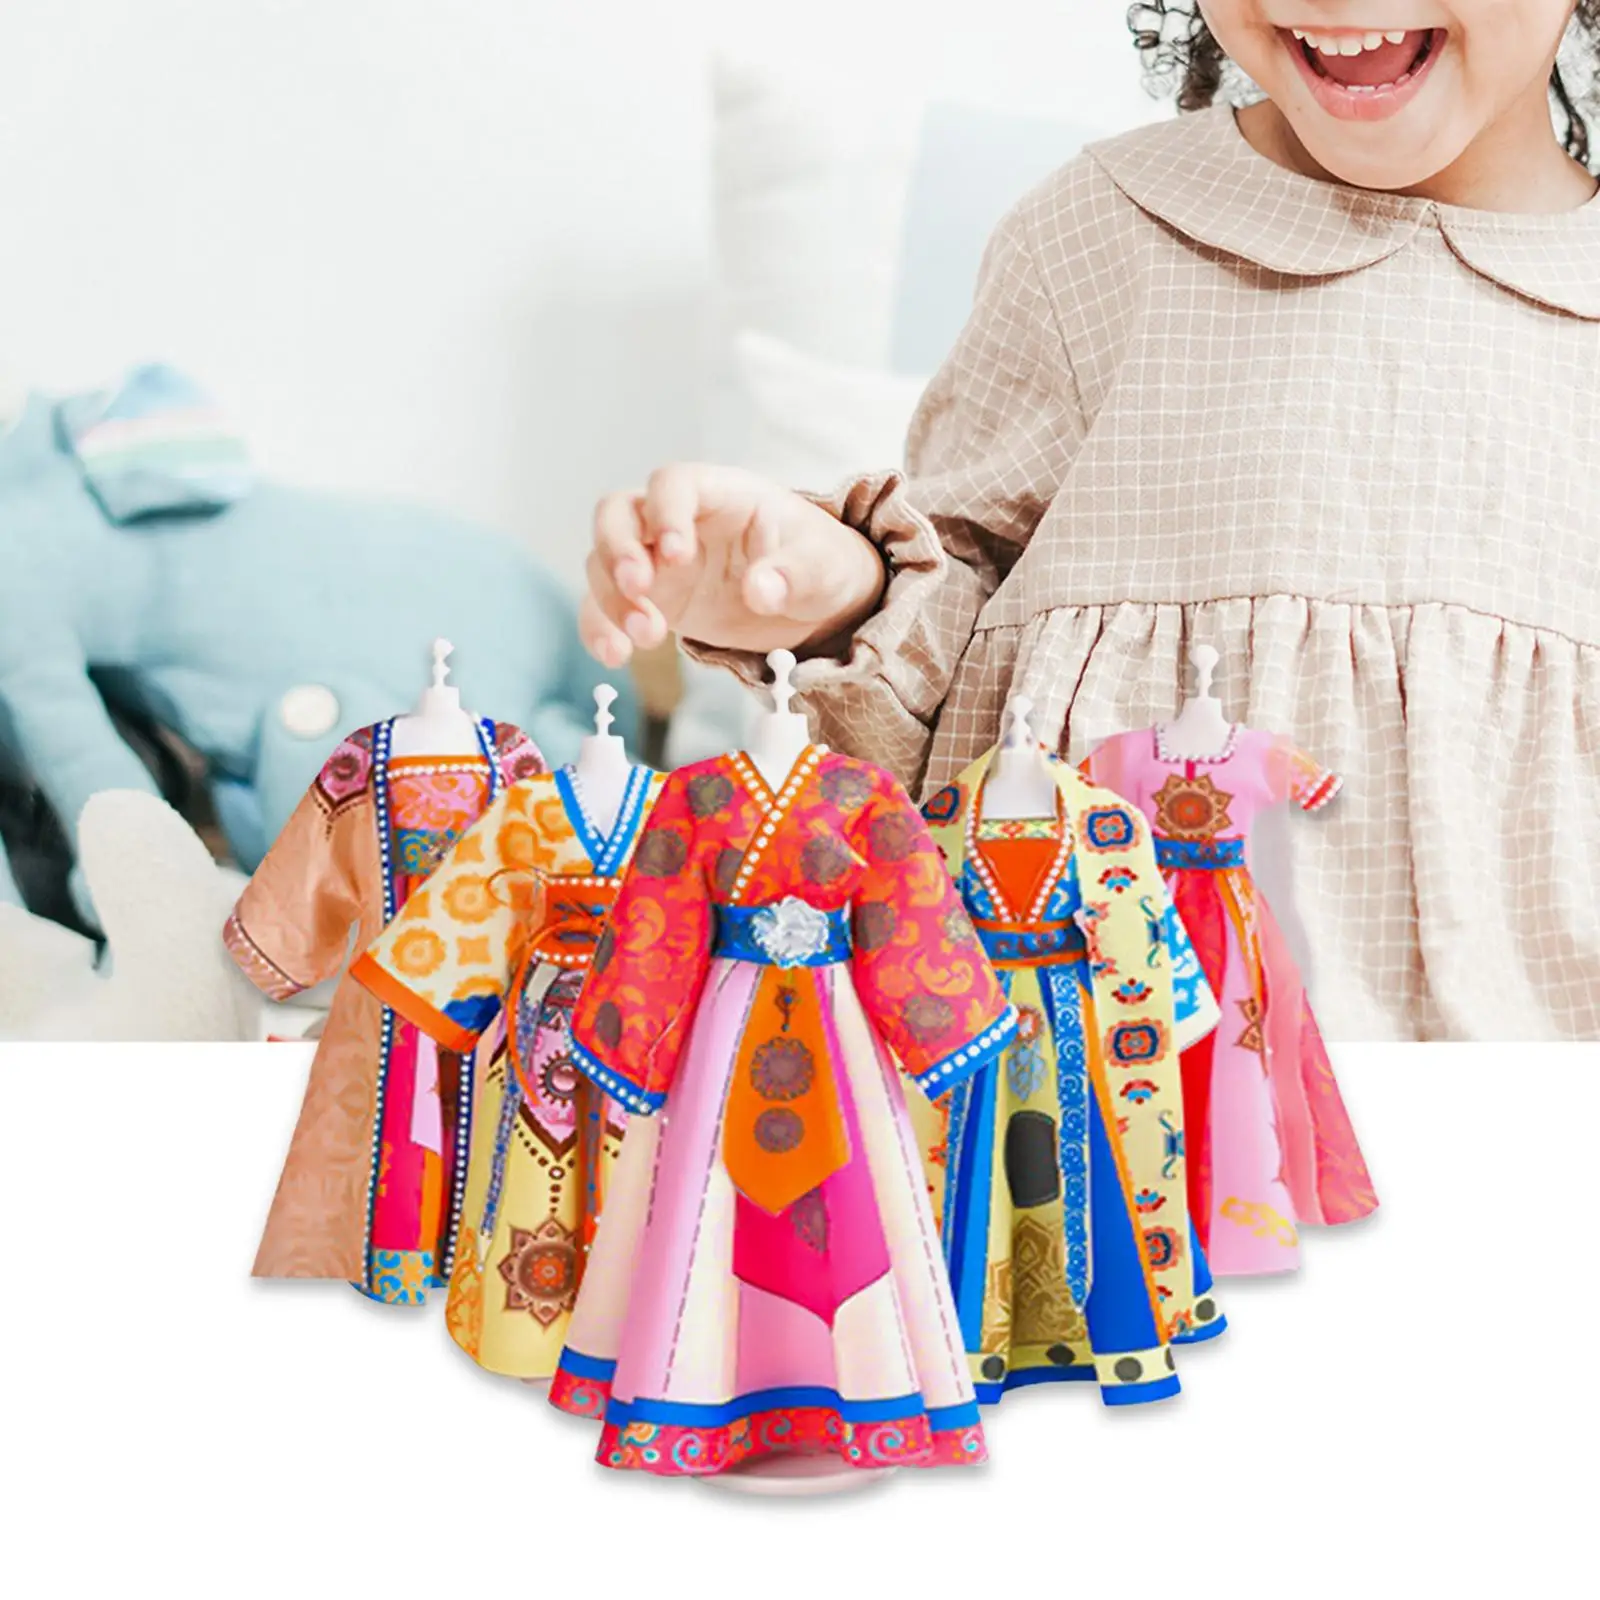 Fashion Design Kits Girls Learning Toys Doll Clothing Design for Age 6 7 8 9 10 11 12 Kids Teen Children Birthday Gifts